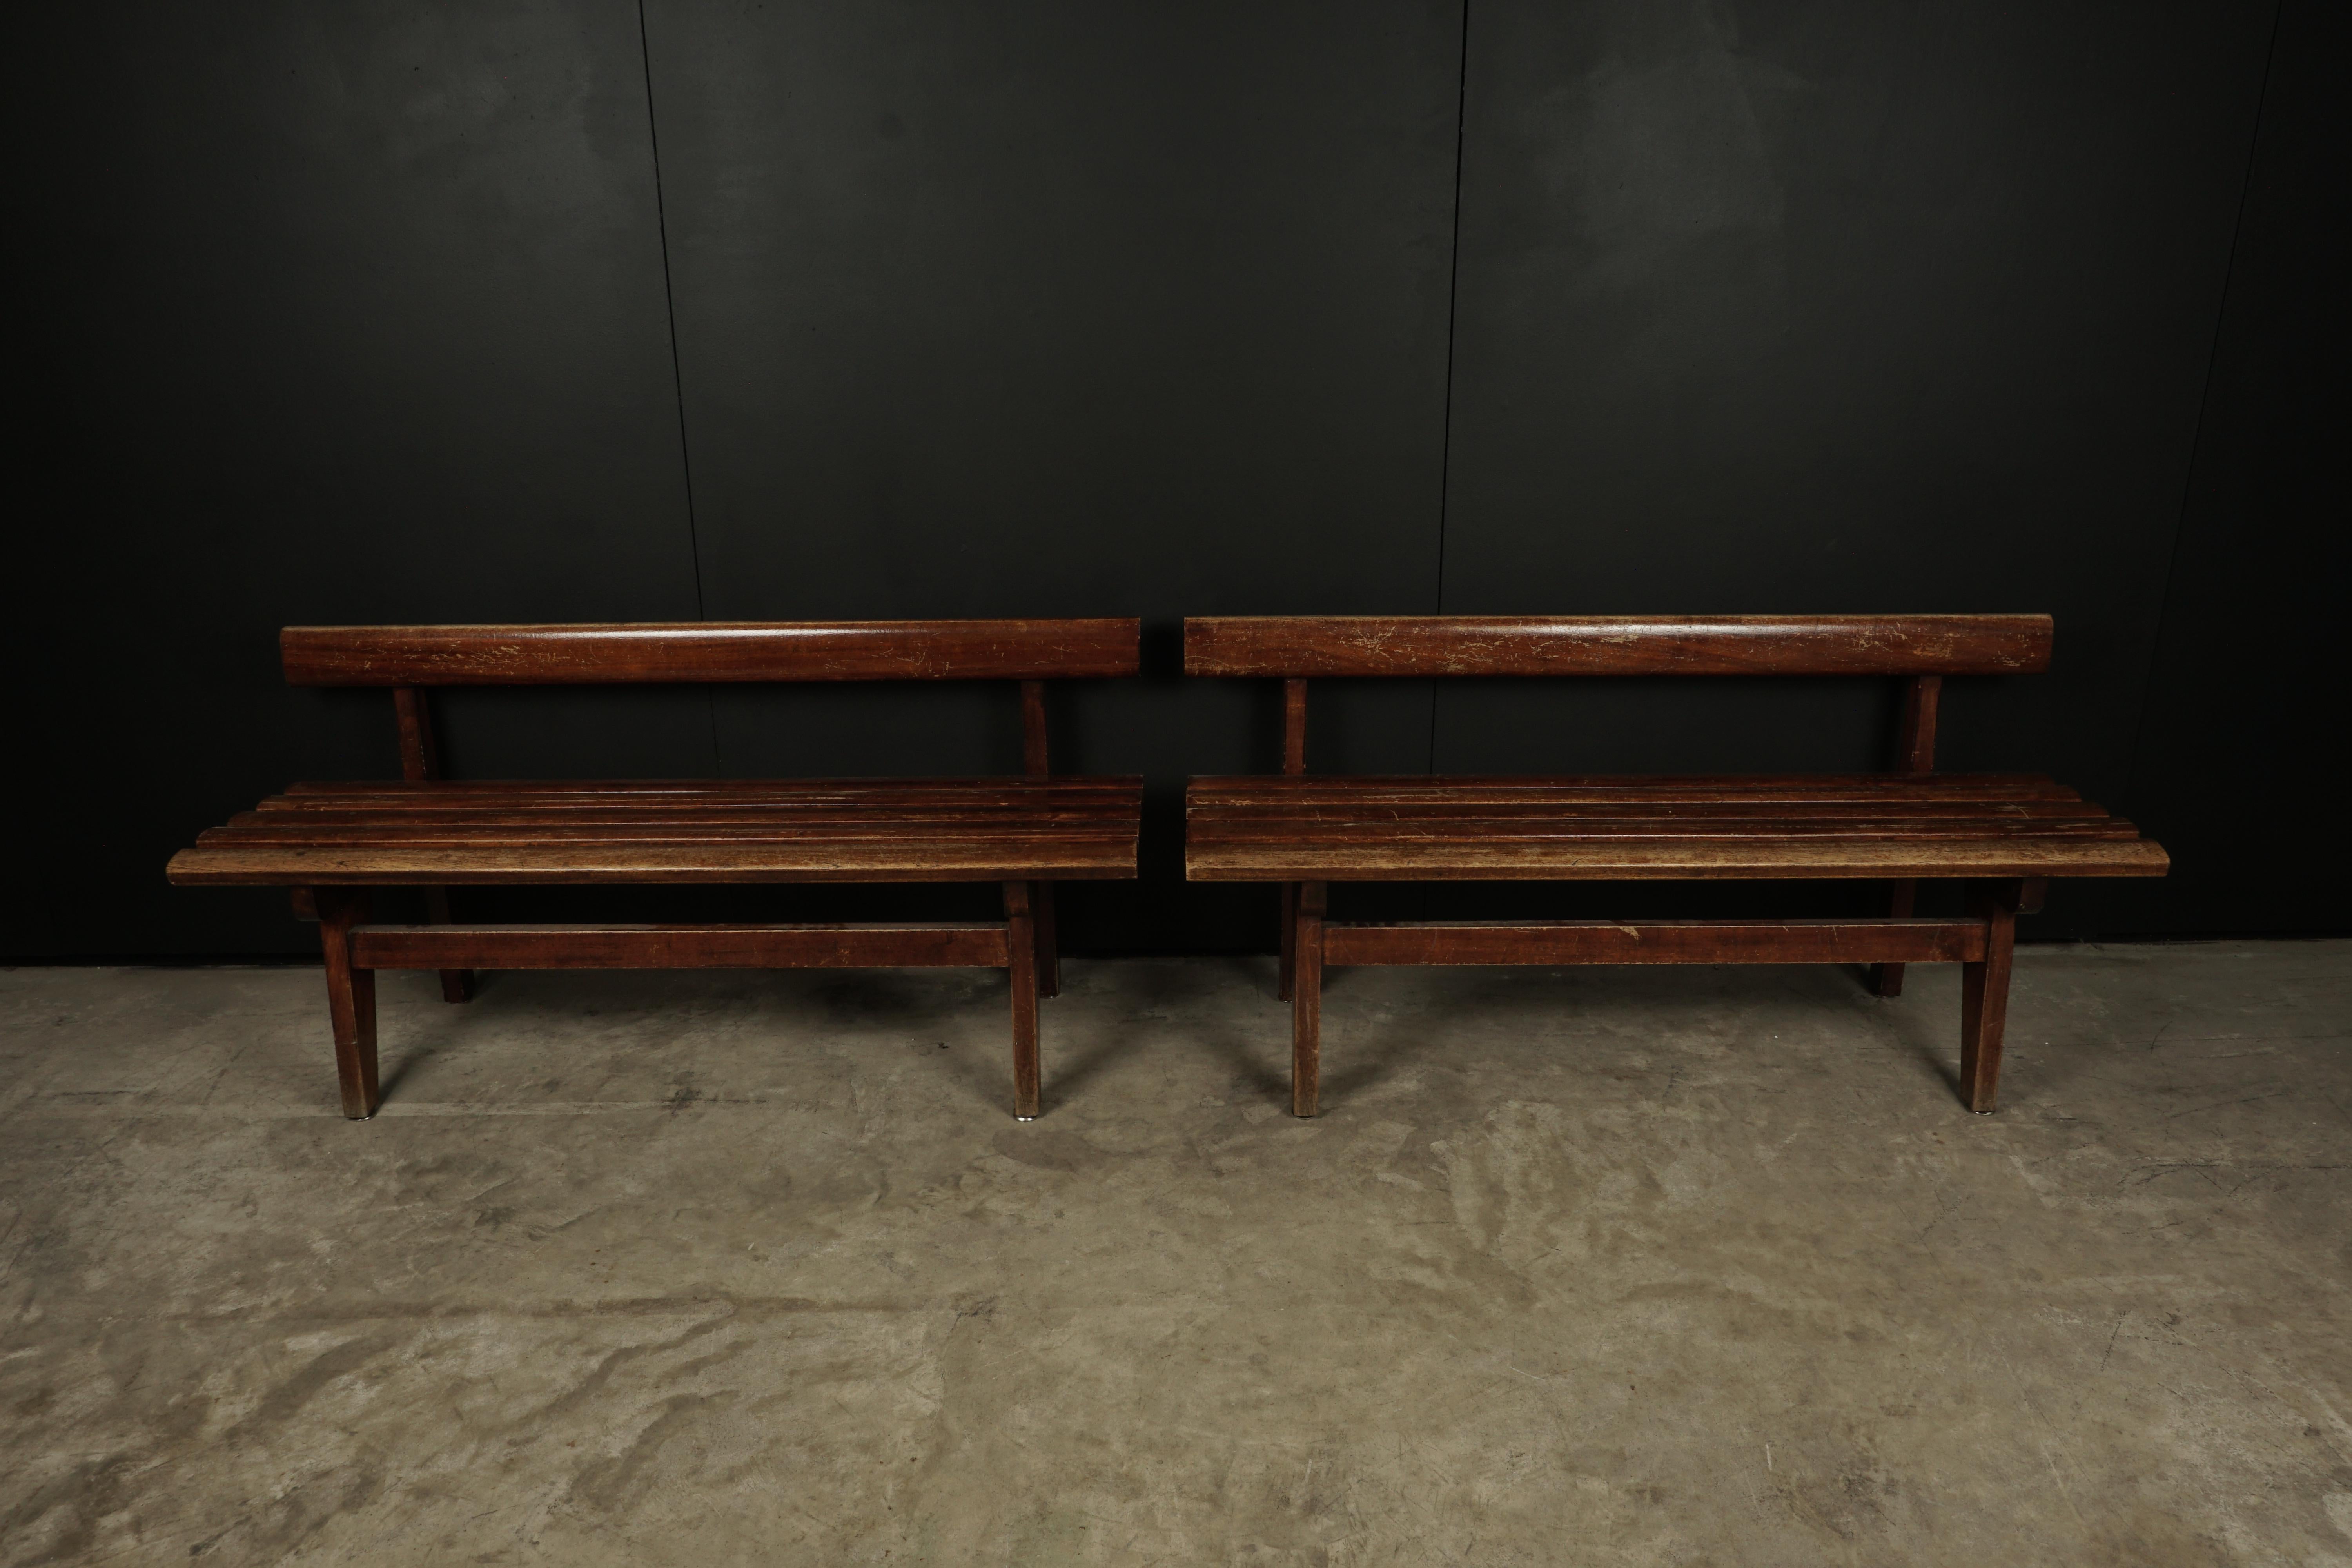 Rare pair of vintage benches from France, 1950s. Presumably from a train station. Nice light wear and patina.